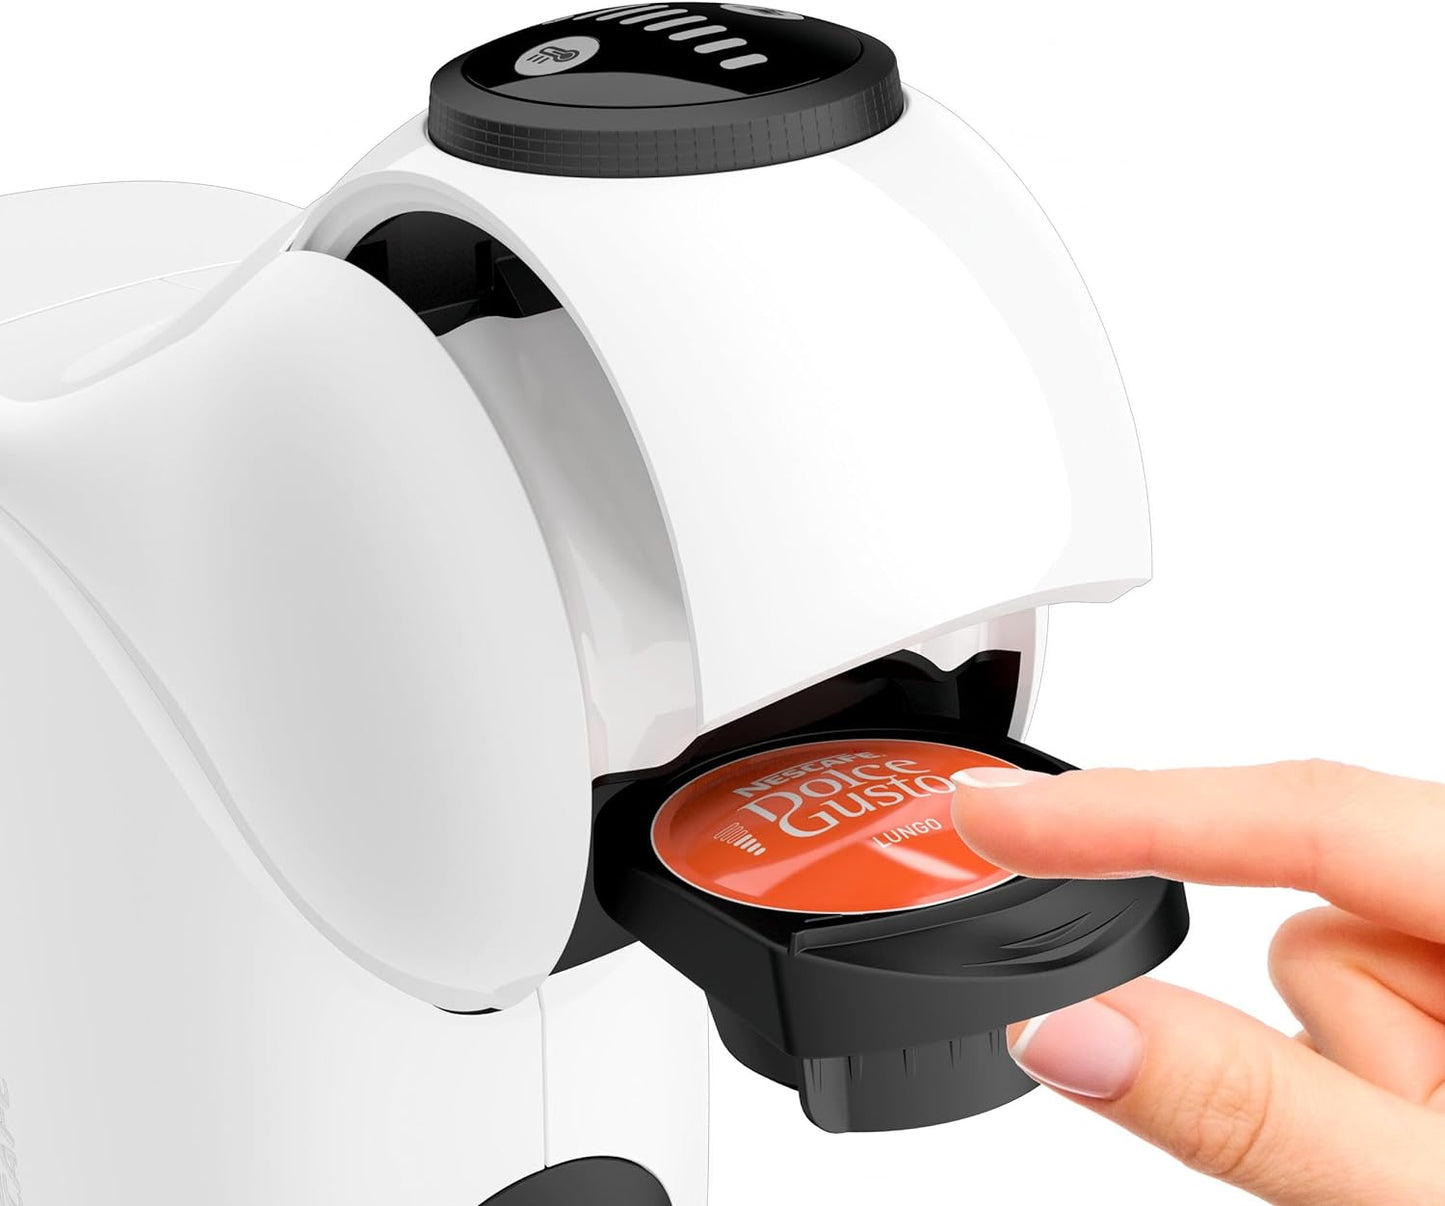 CAFETERA KRUPS DOLCE GUSTO BCA